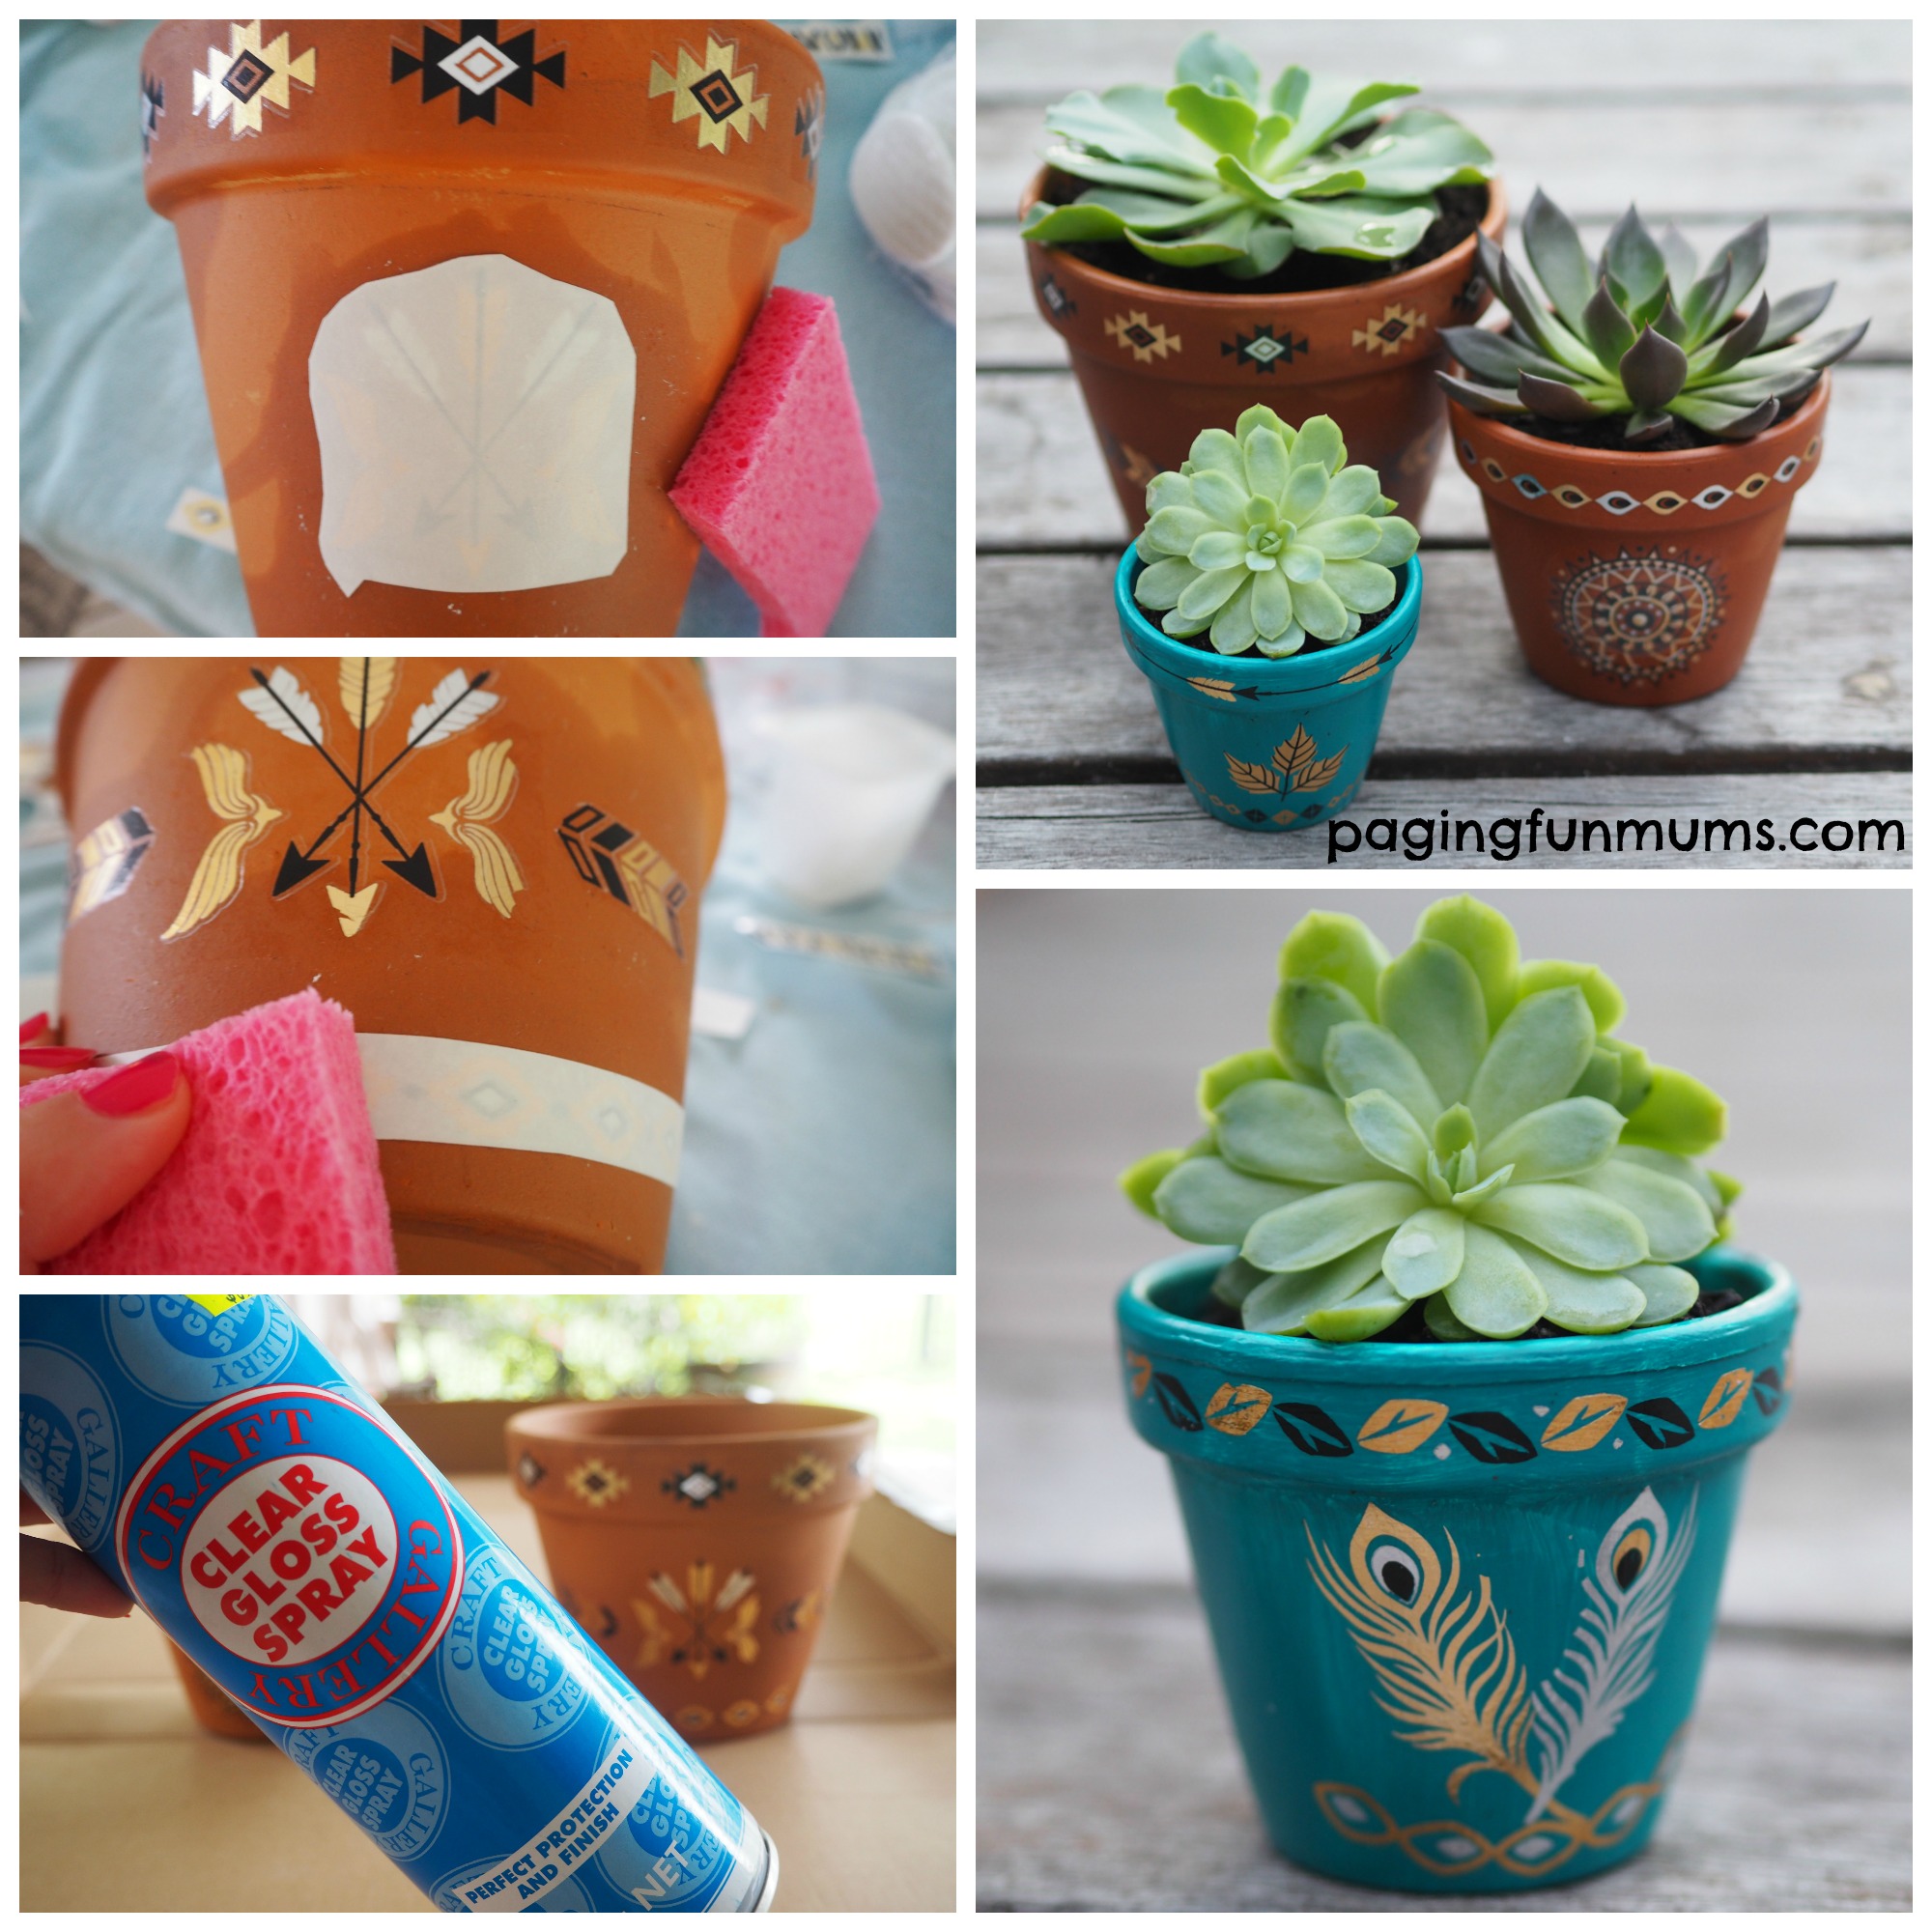 Using Temporary Tattoos to Decorate Terracotta Pots - Paging Fun Mums